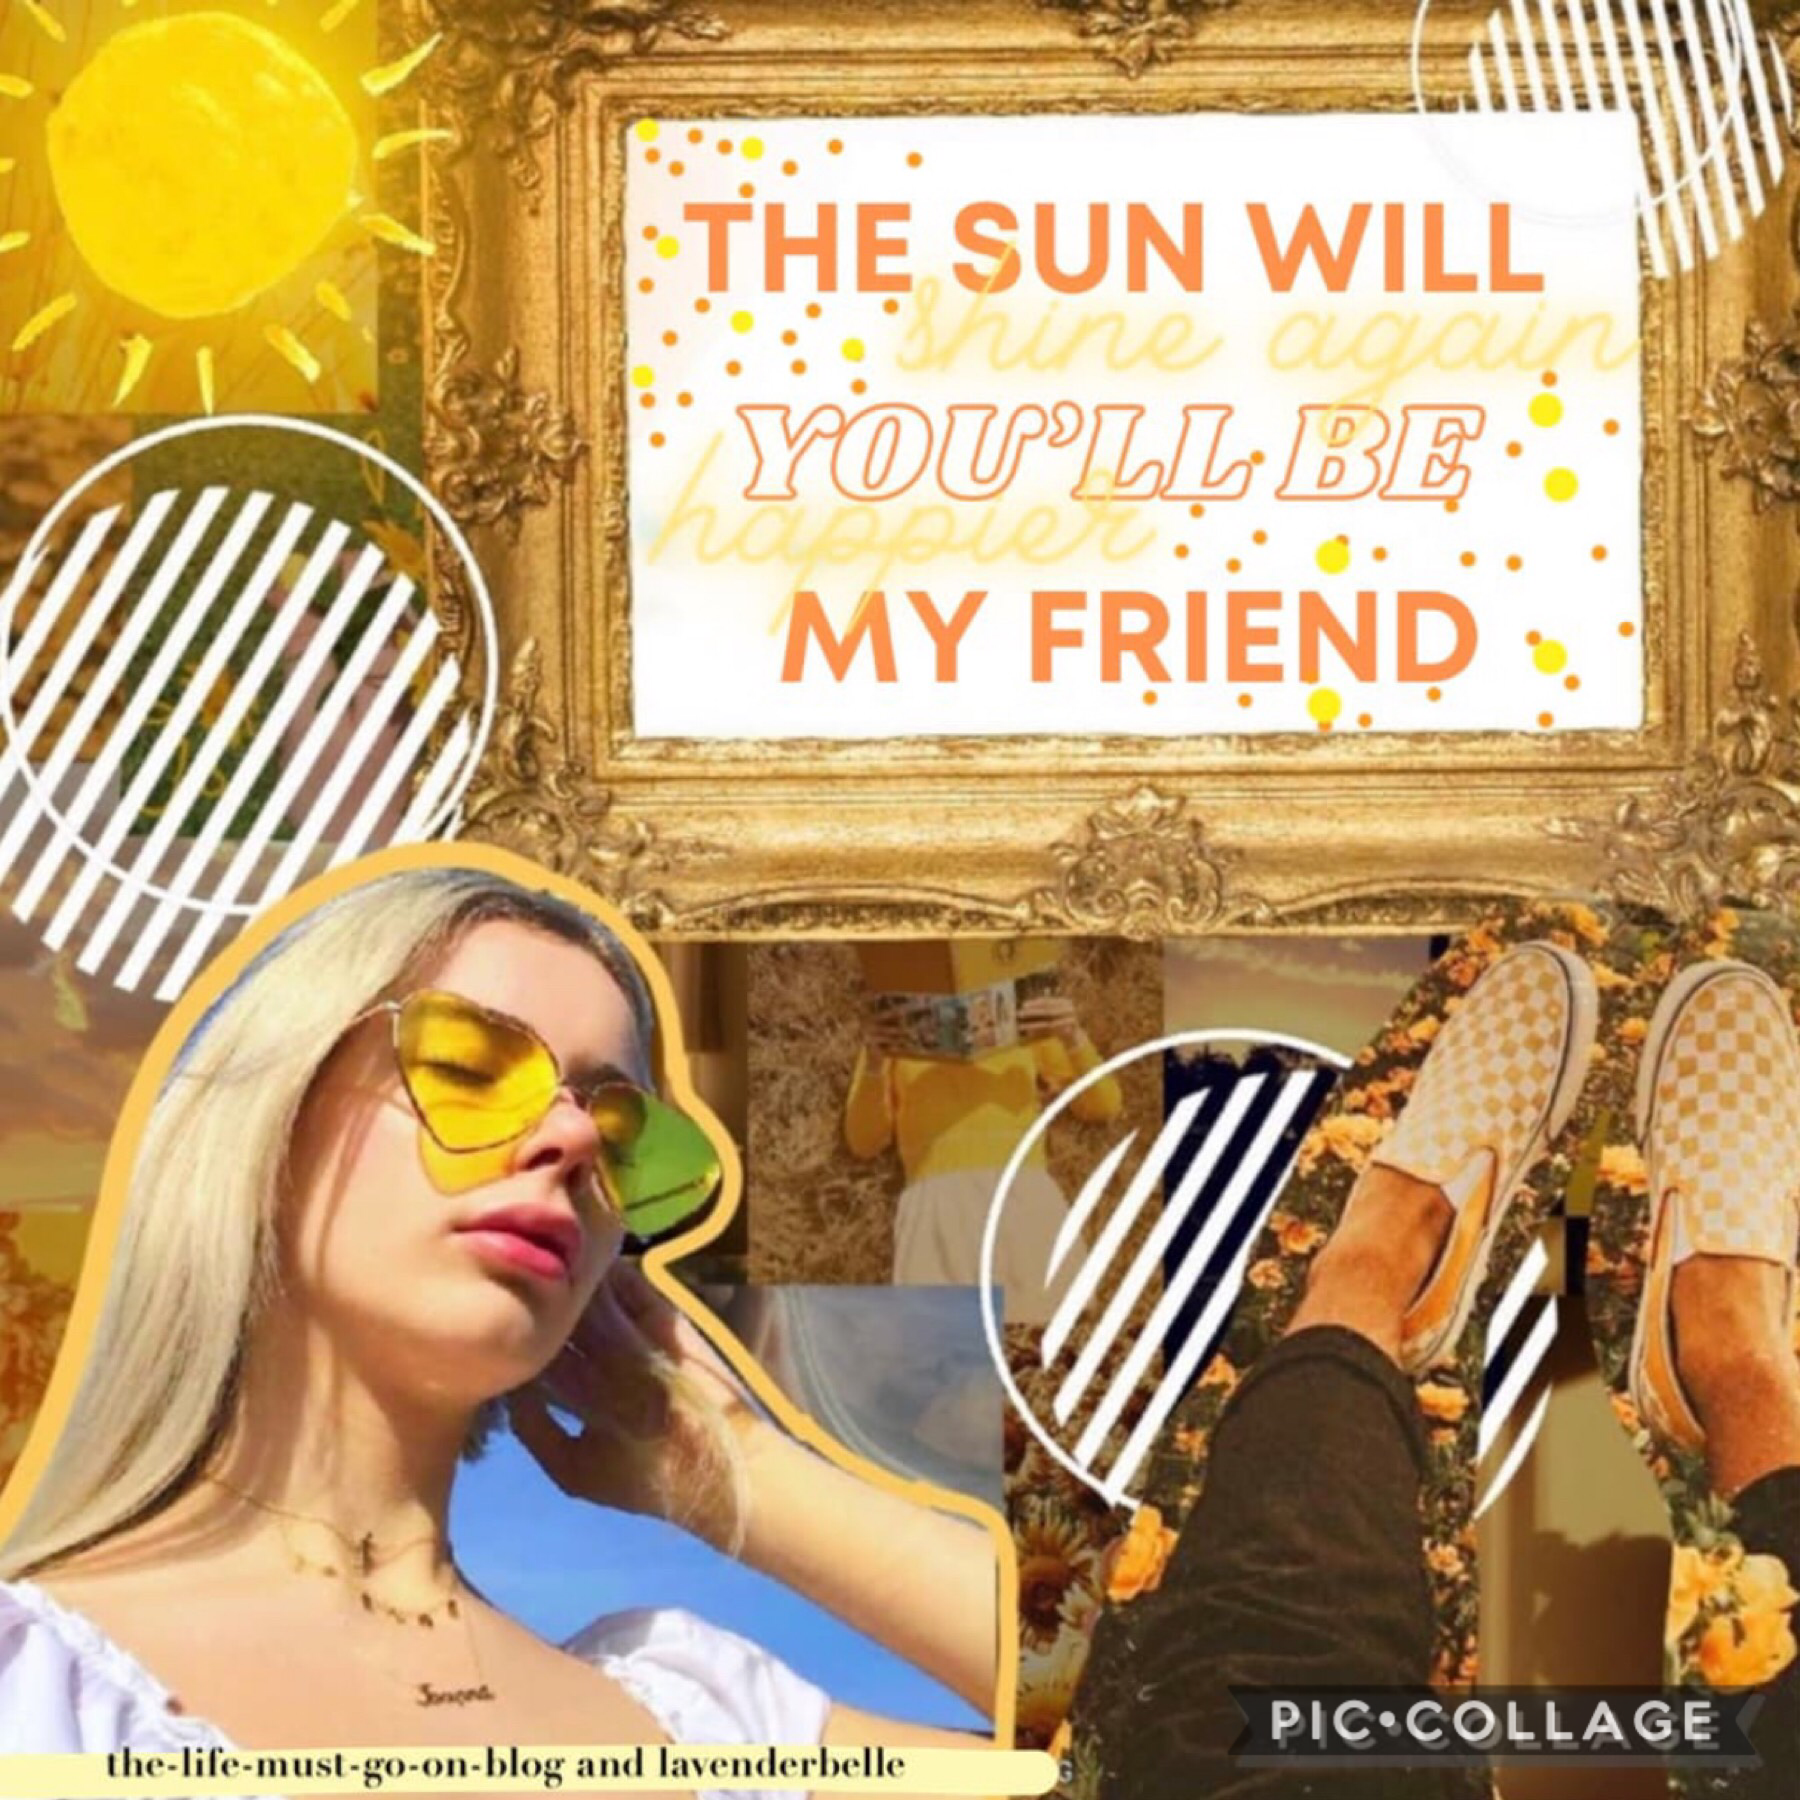 Collab with.....
the-life-must-go-on-blog!!!💗💗💗 I did the bg and she did the beautiful text! It was so fun working with you! Make sure you go check her acc out! Qotd: fav month? Aotd: January💖